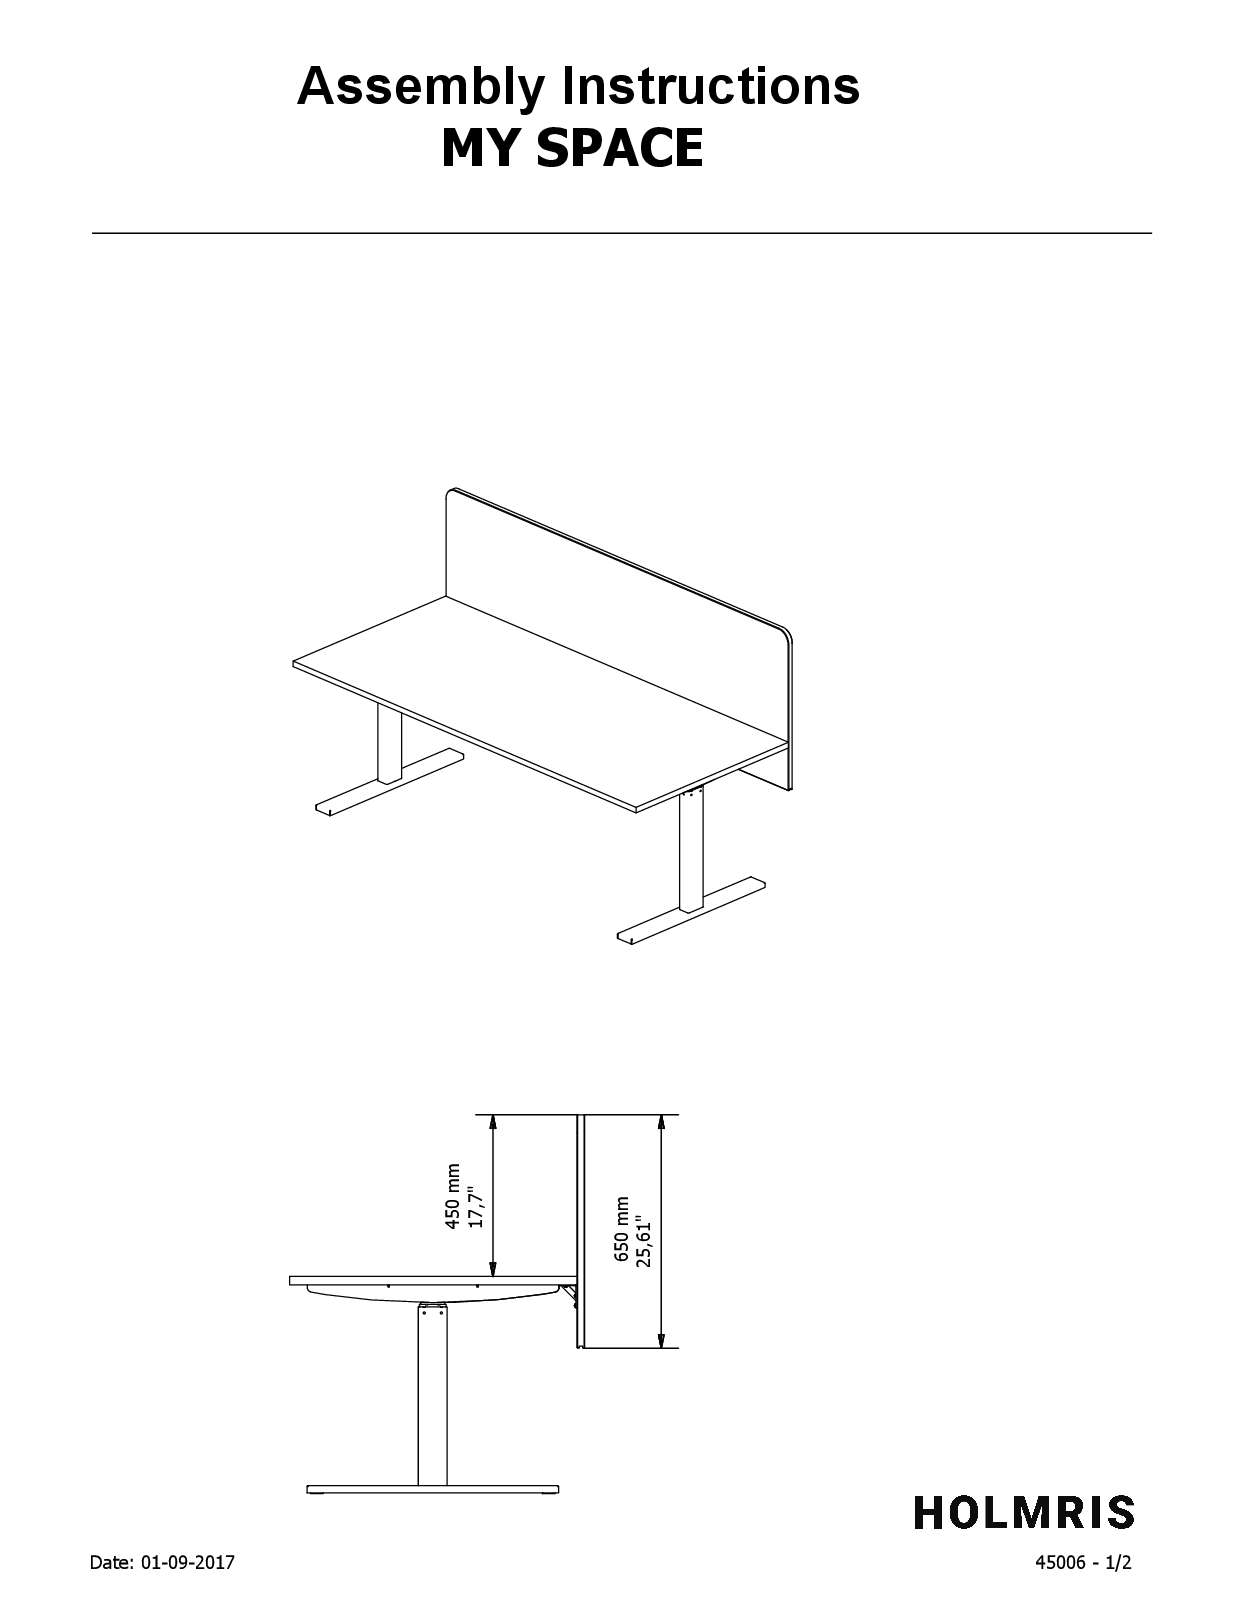 Wall Screens - Assembly Instructions